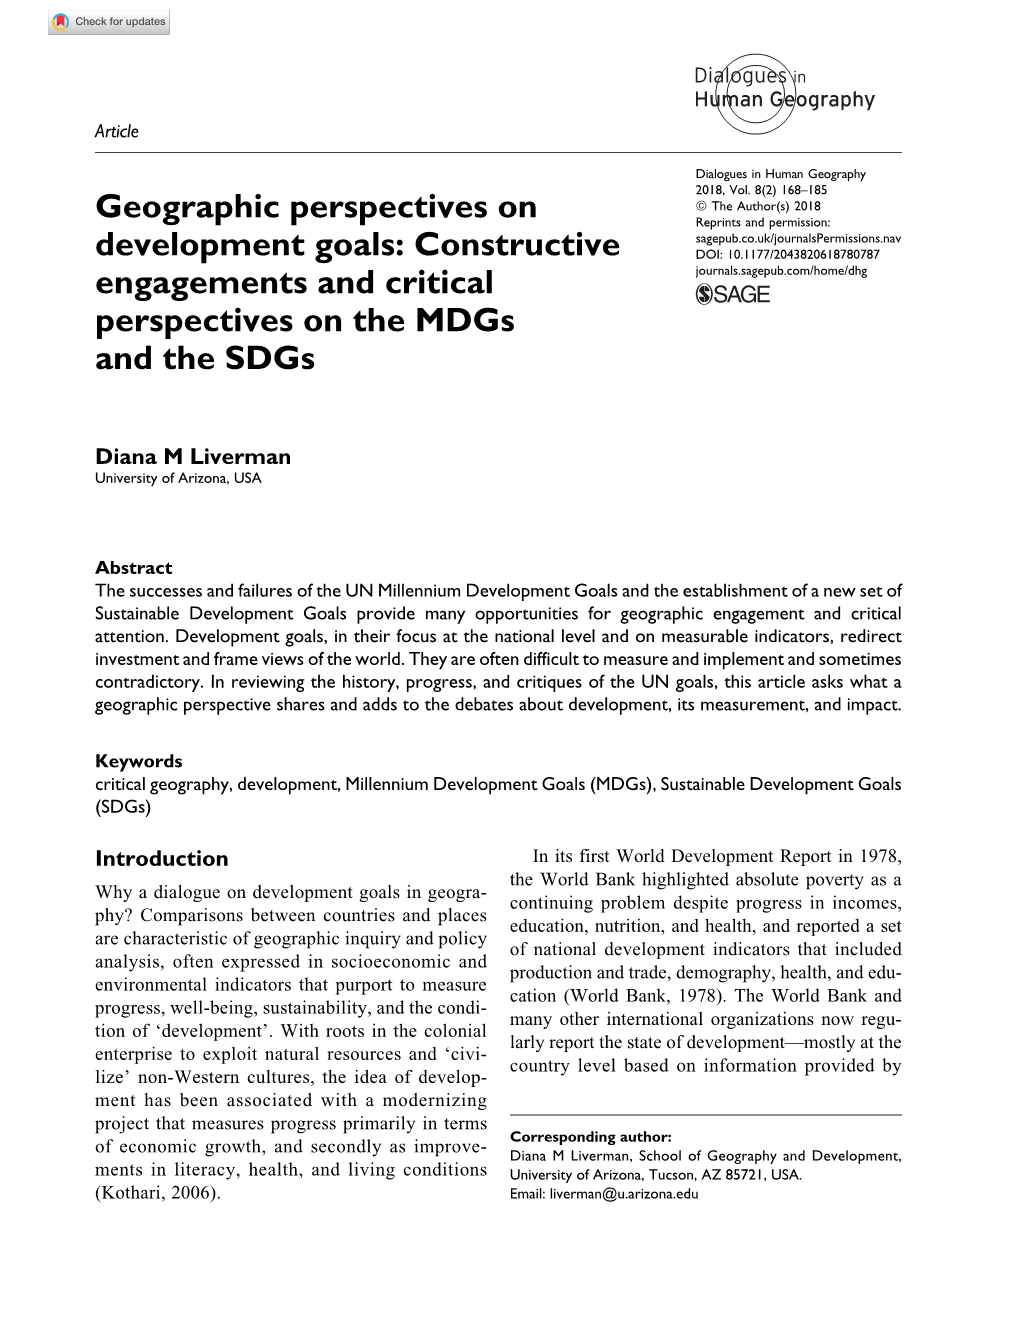 Geographic Perspectives on Development Goals